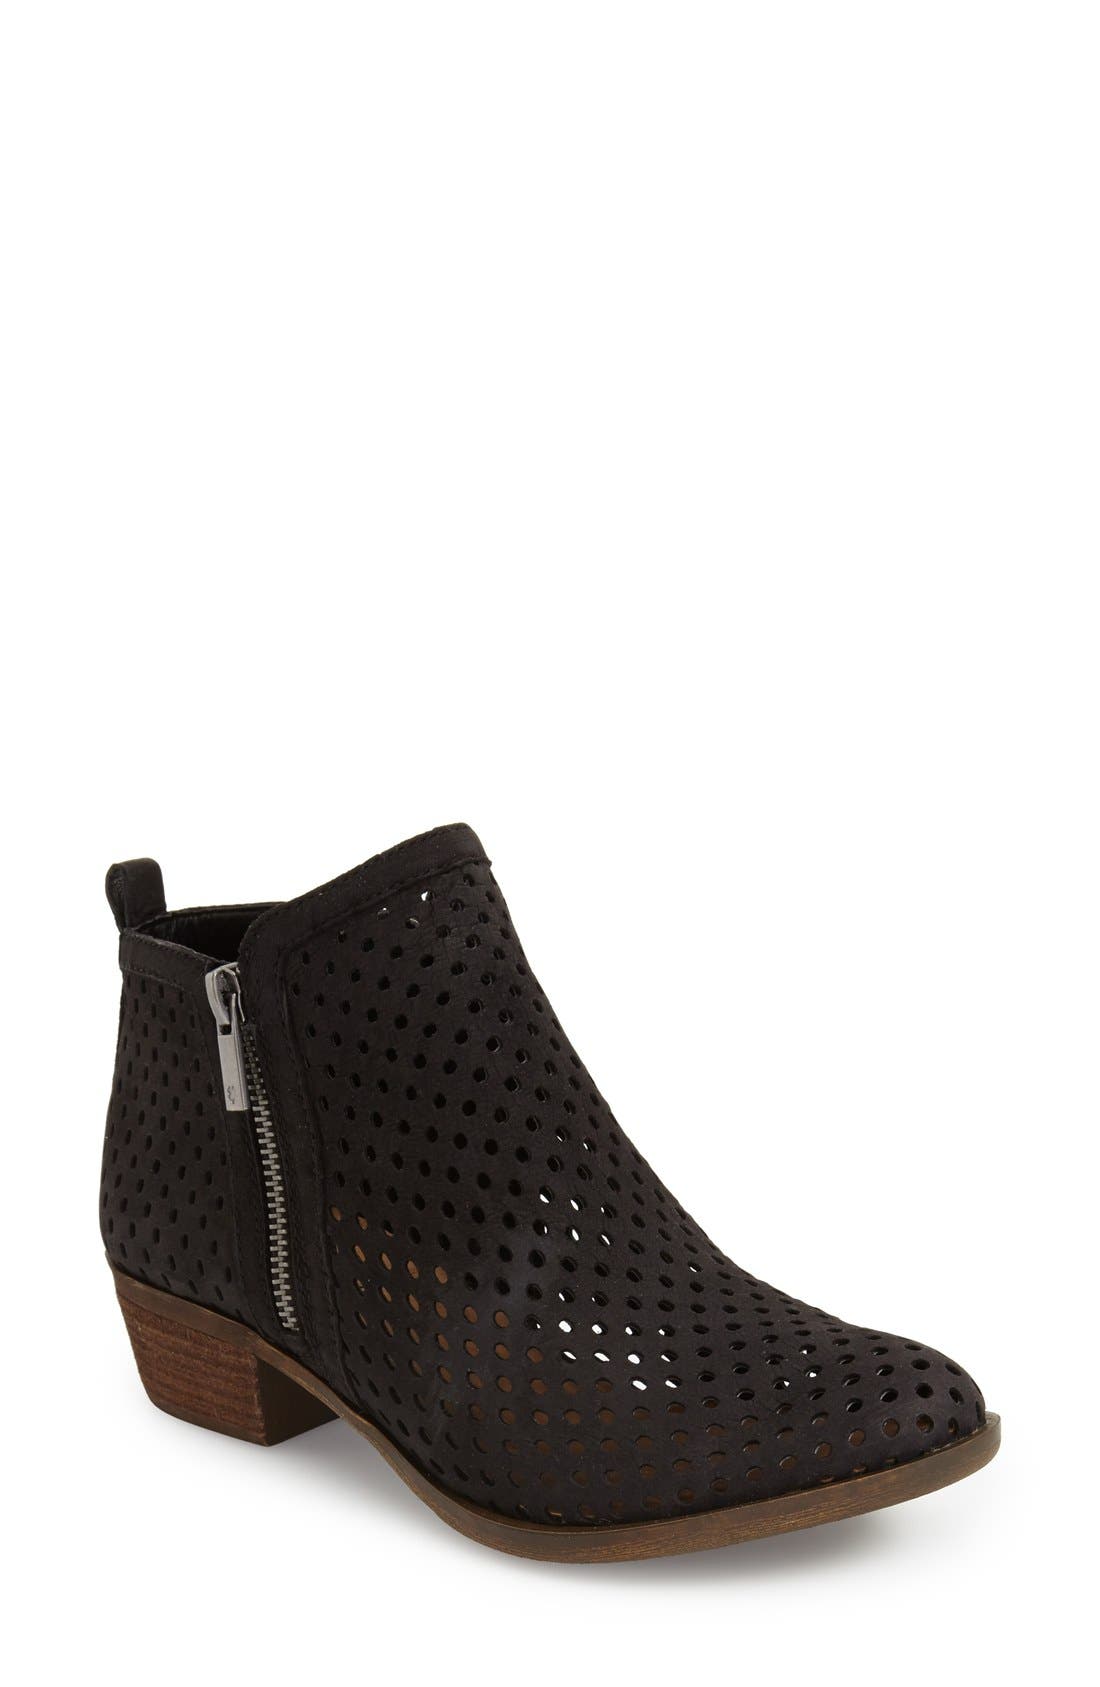 lucky brand women's perforated basel booties